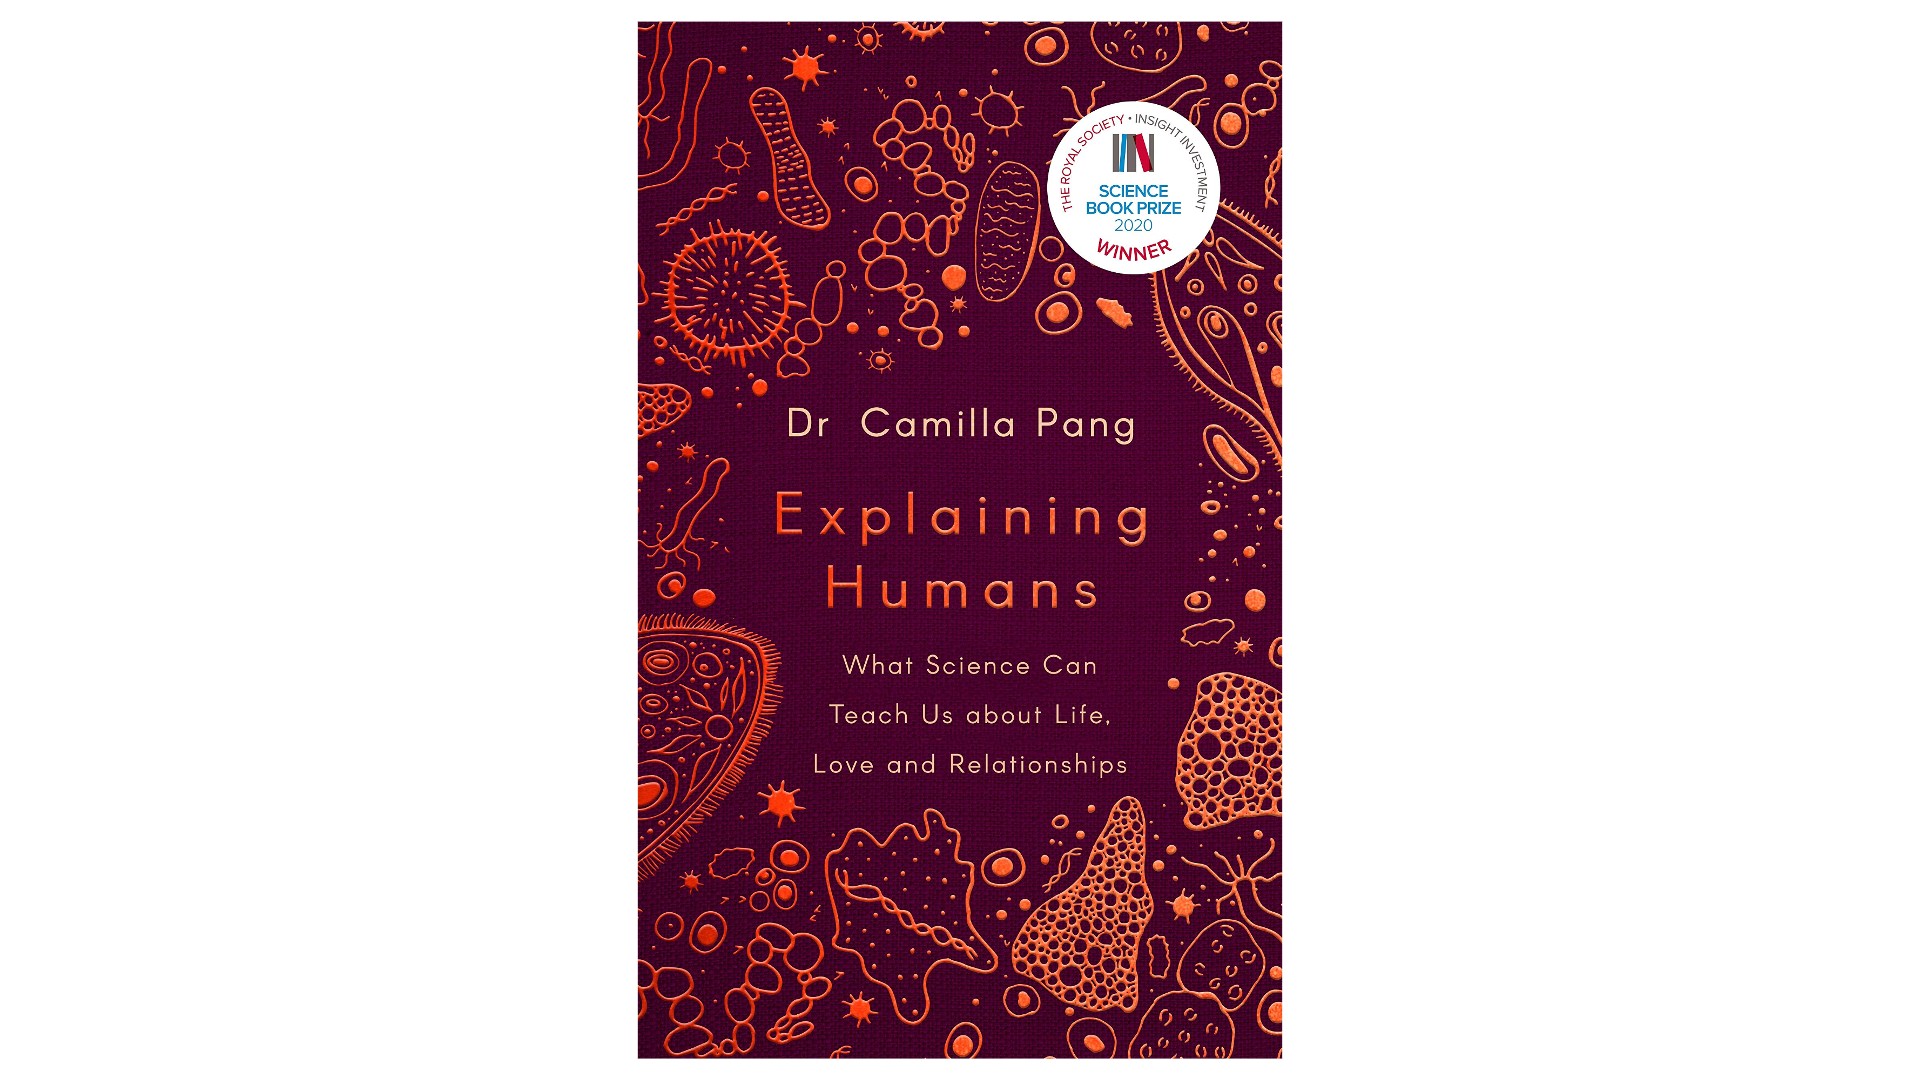 Book cover of What Science Can Teach Us about Life, Love and Relationships by Dr. Camilla Pang